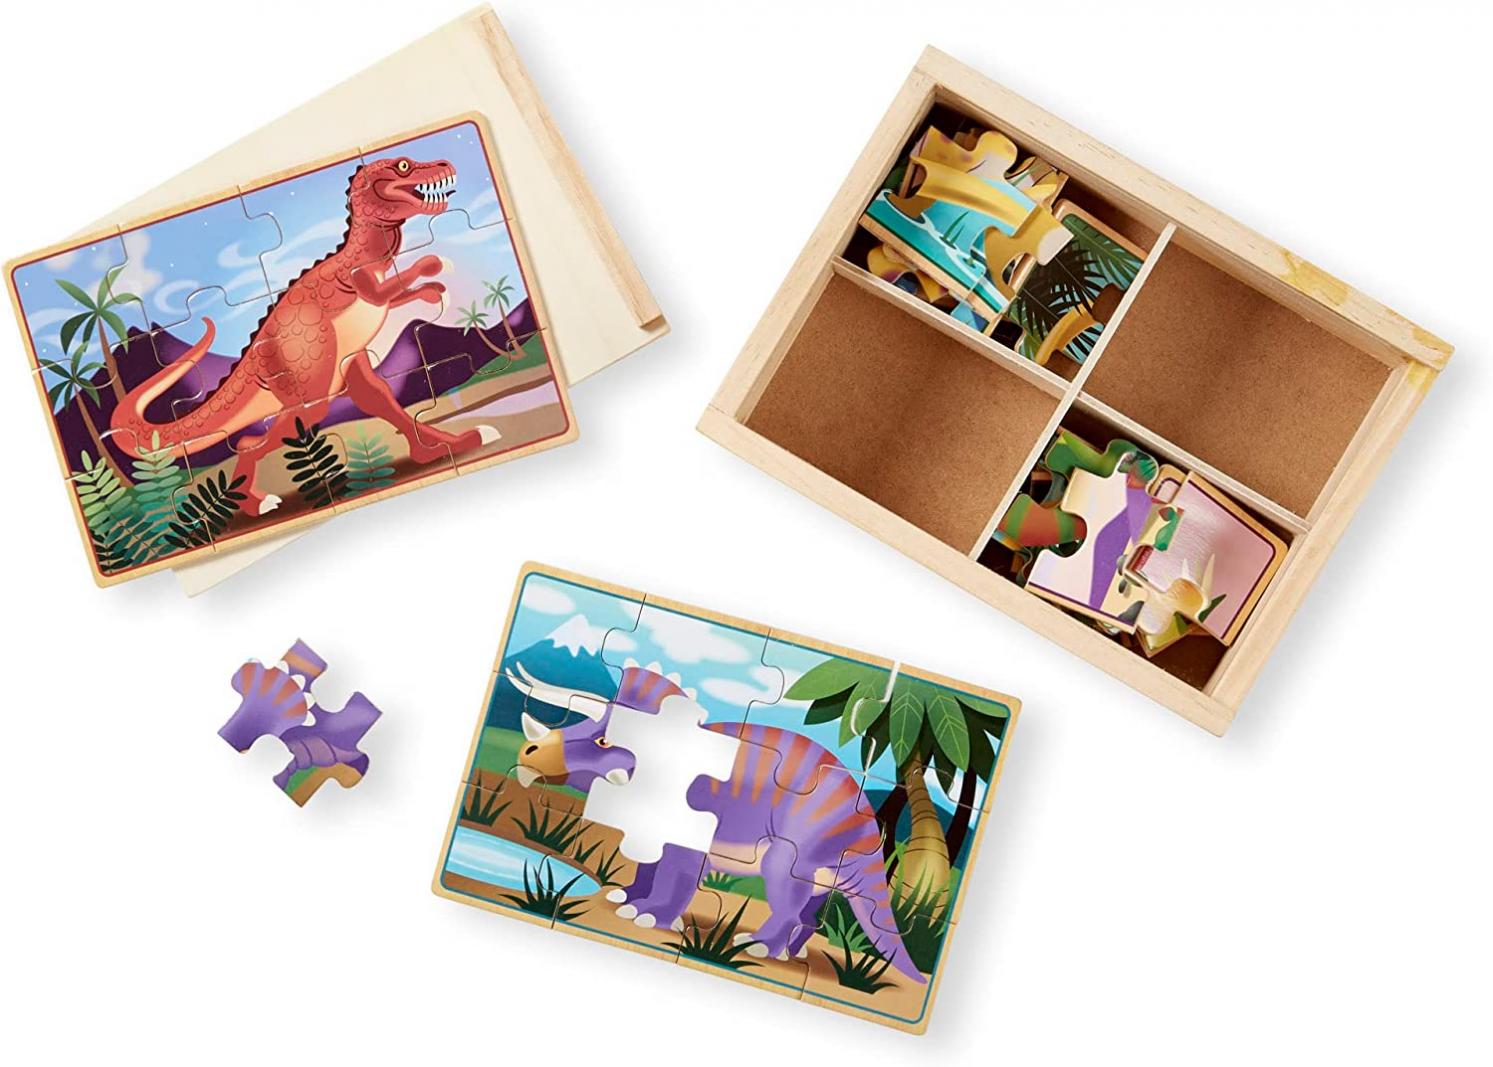 Melissa & Doug Dinosaurs 4-in-1 Wooden Jigsaw Puzzles in a Storage Box (48 pcs) - Kids Puzzle, Dinosaur Puzzles for Kids Ages 3+